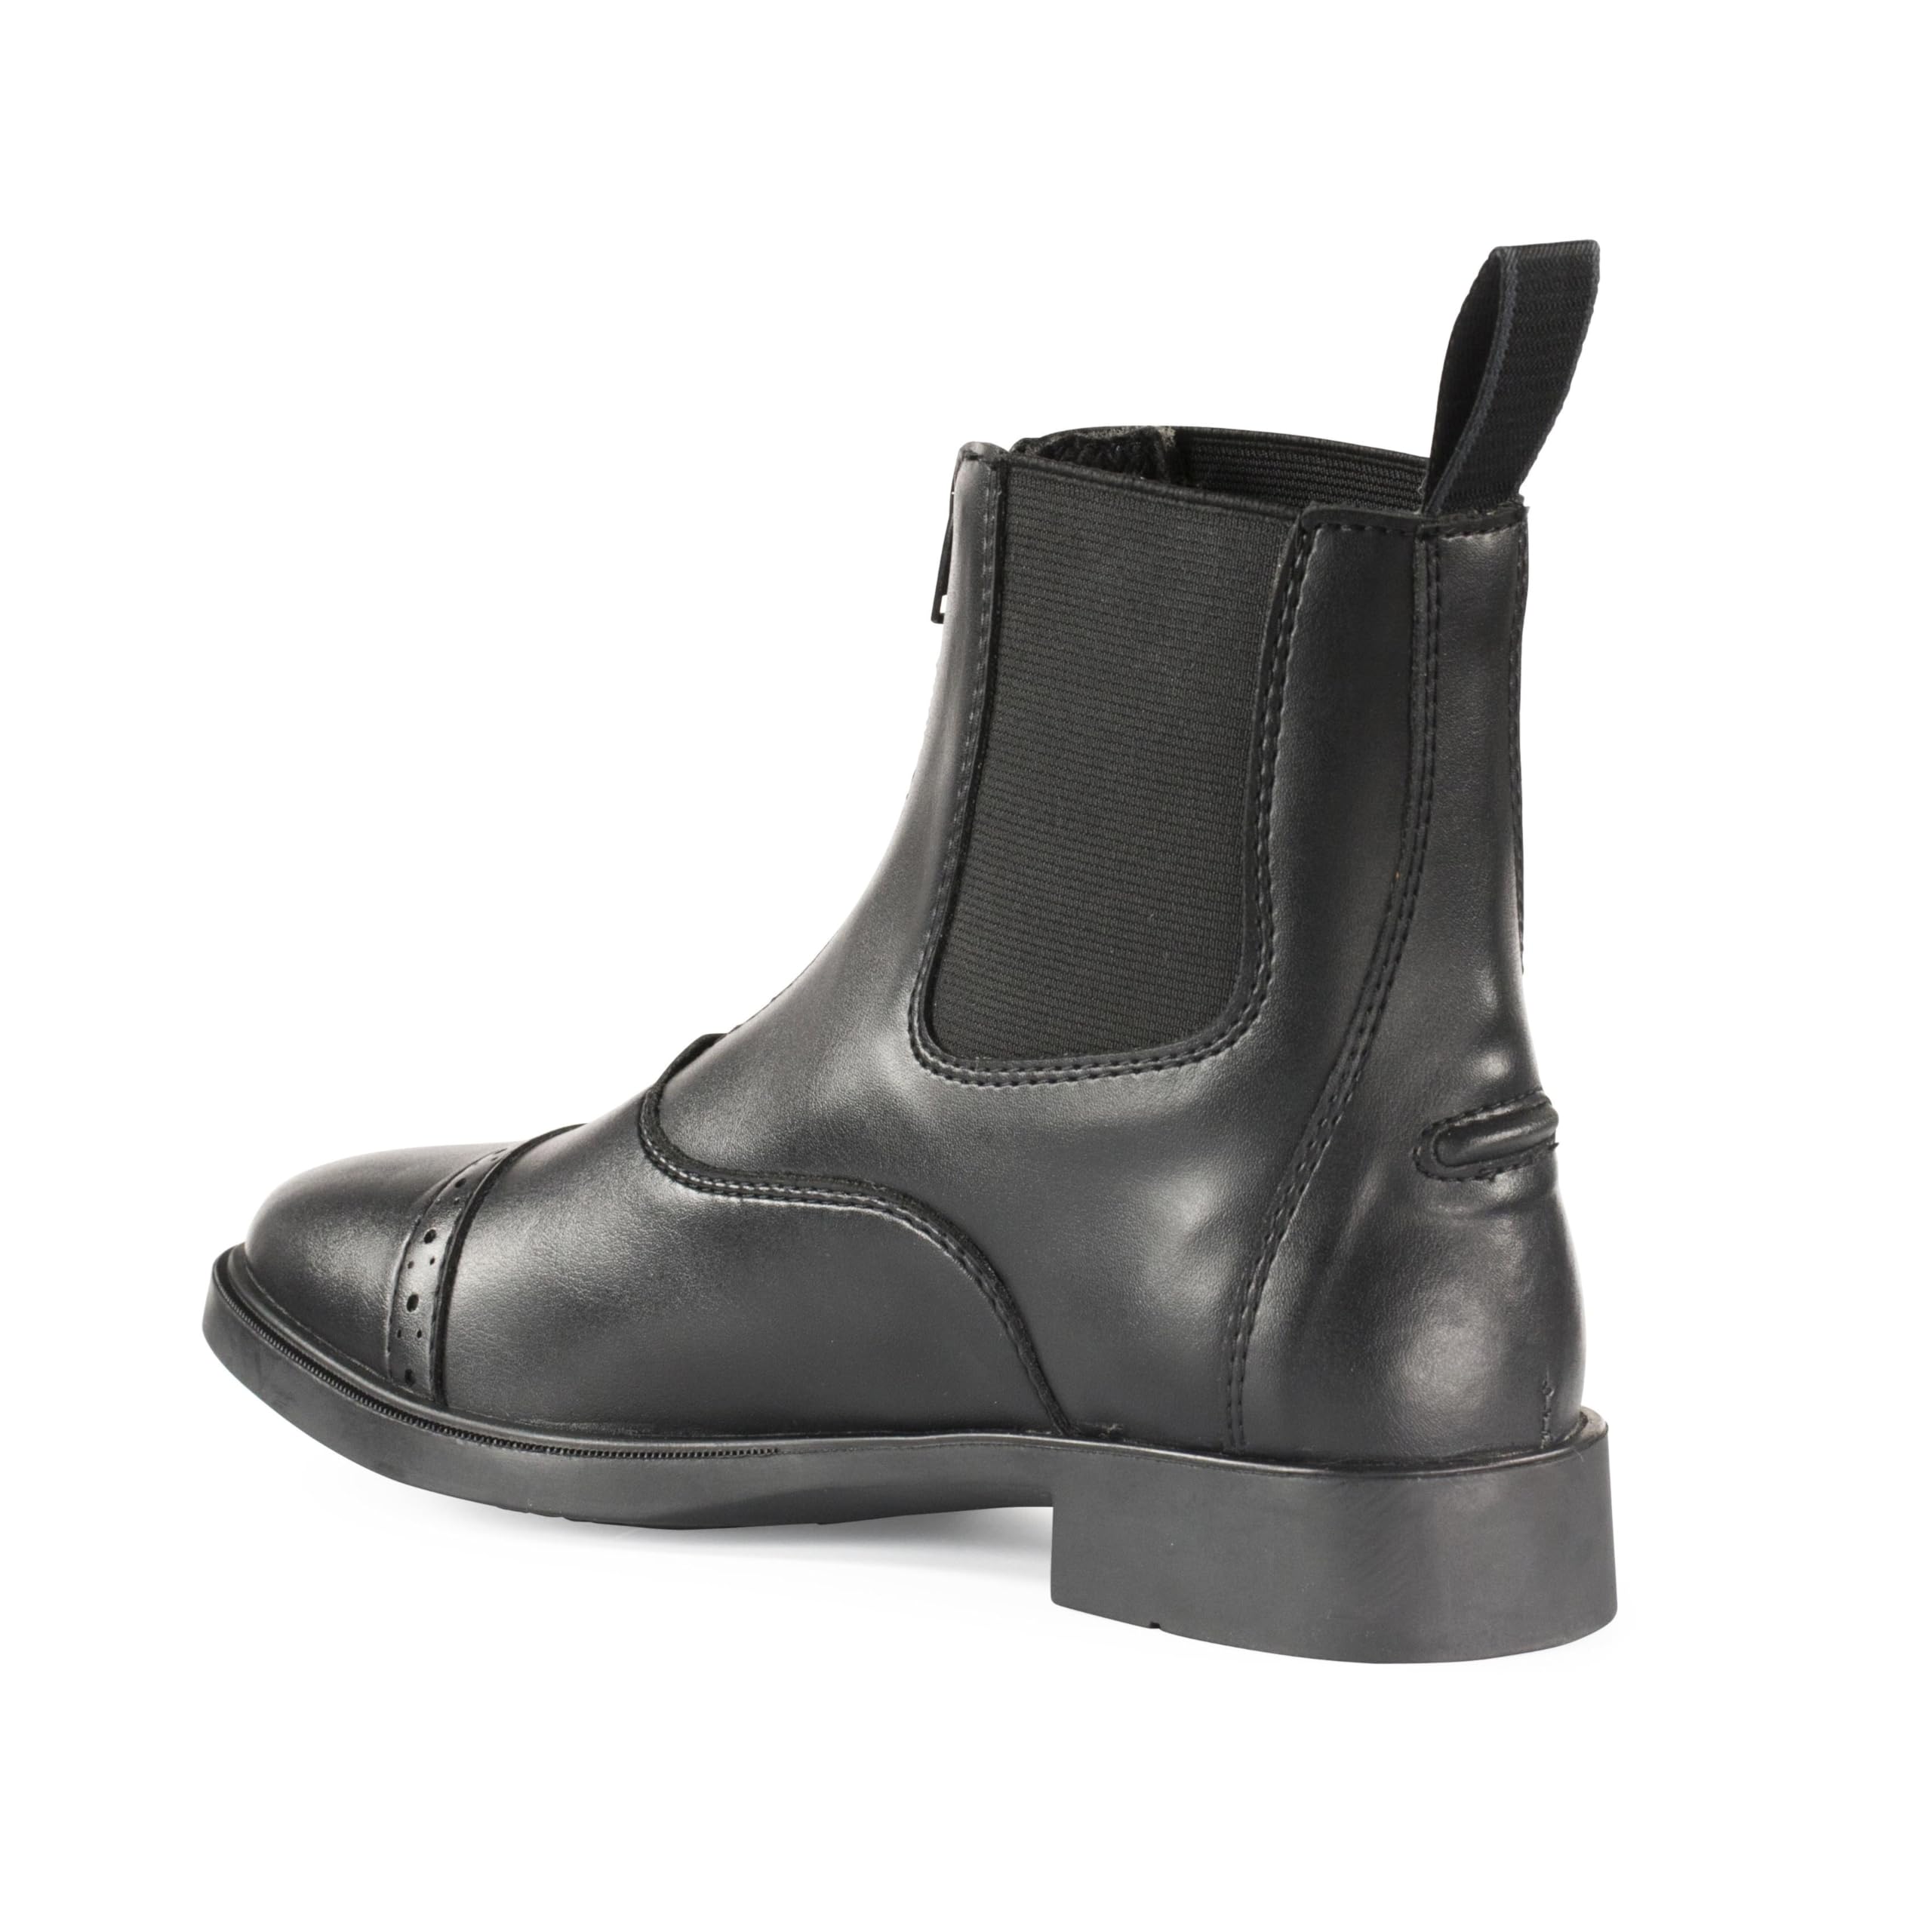 HORZE Wexford Women's Equestrian Synthetic Leather Zip-Up Schooling Paddock Boots - Black - 7